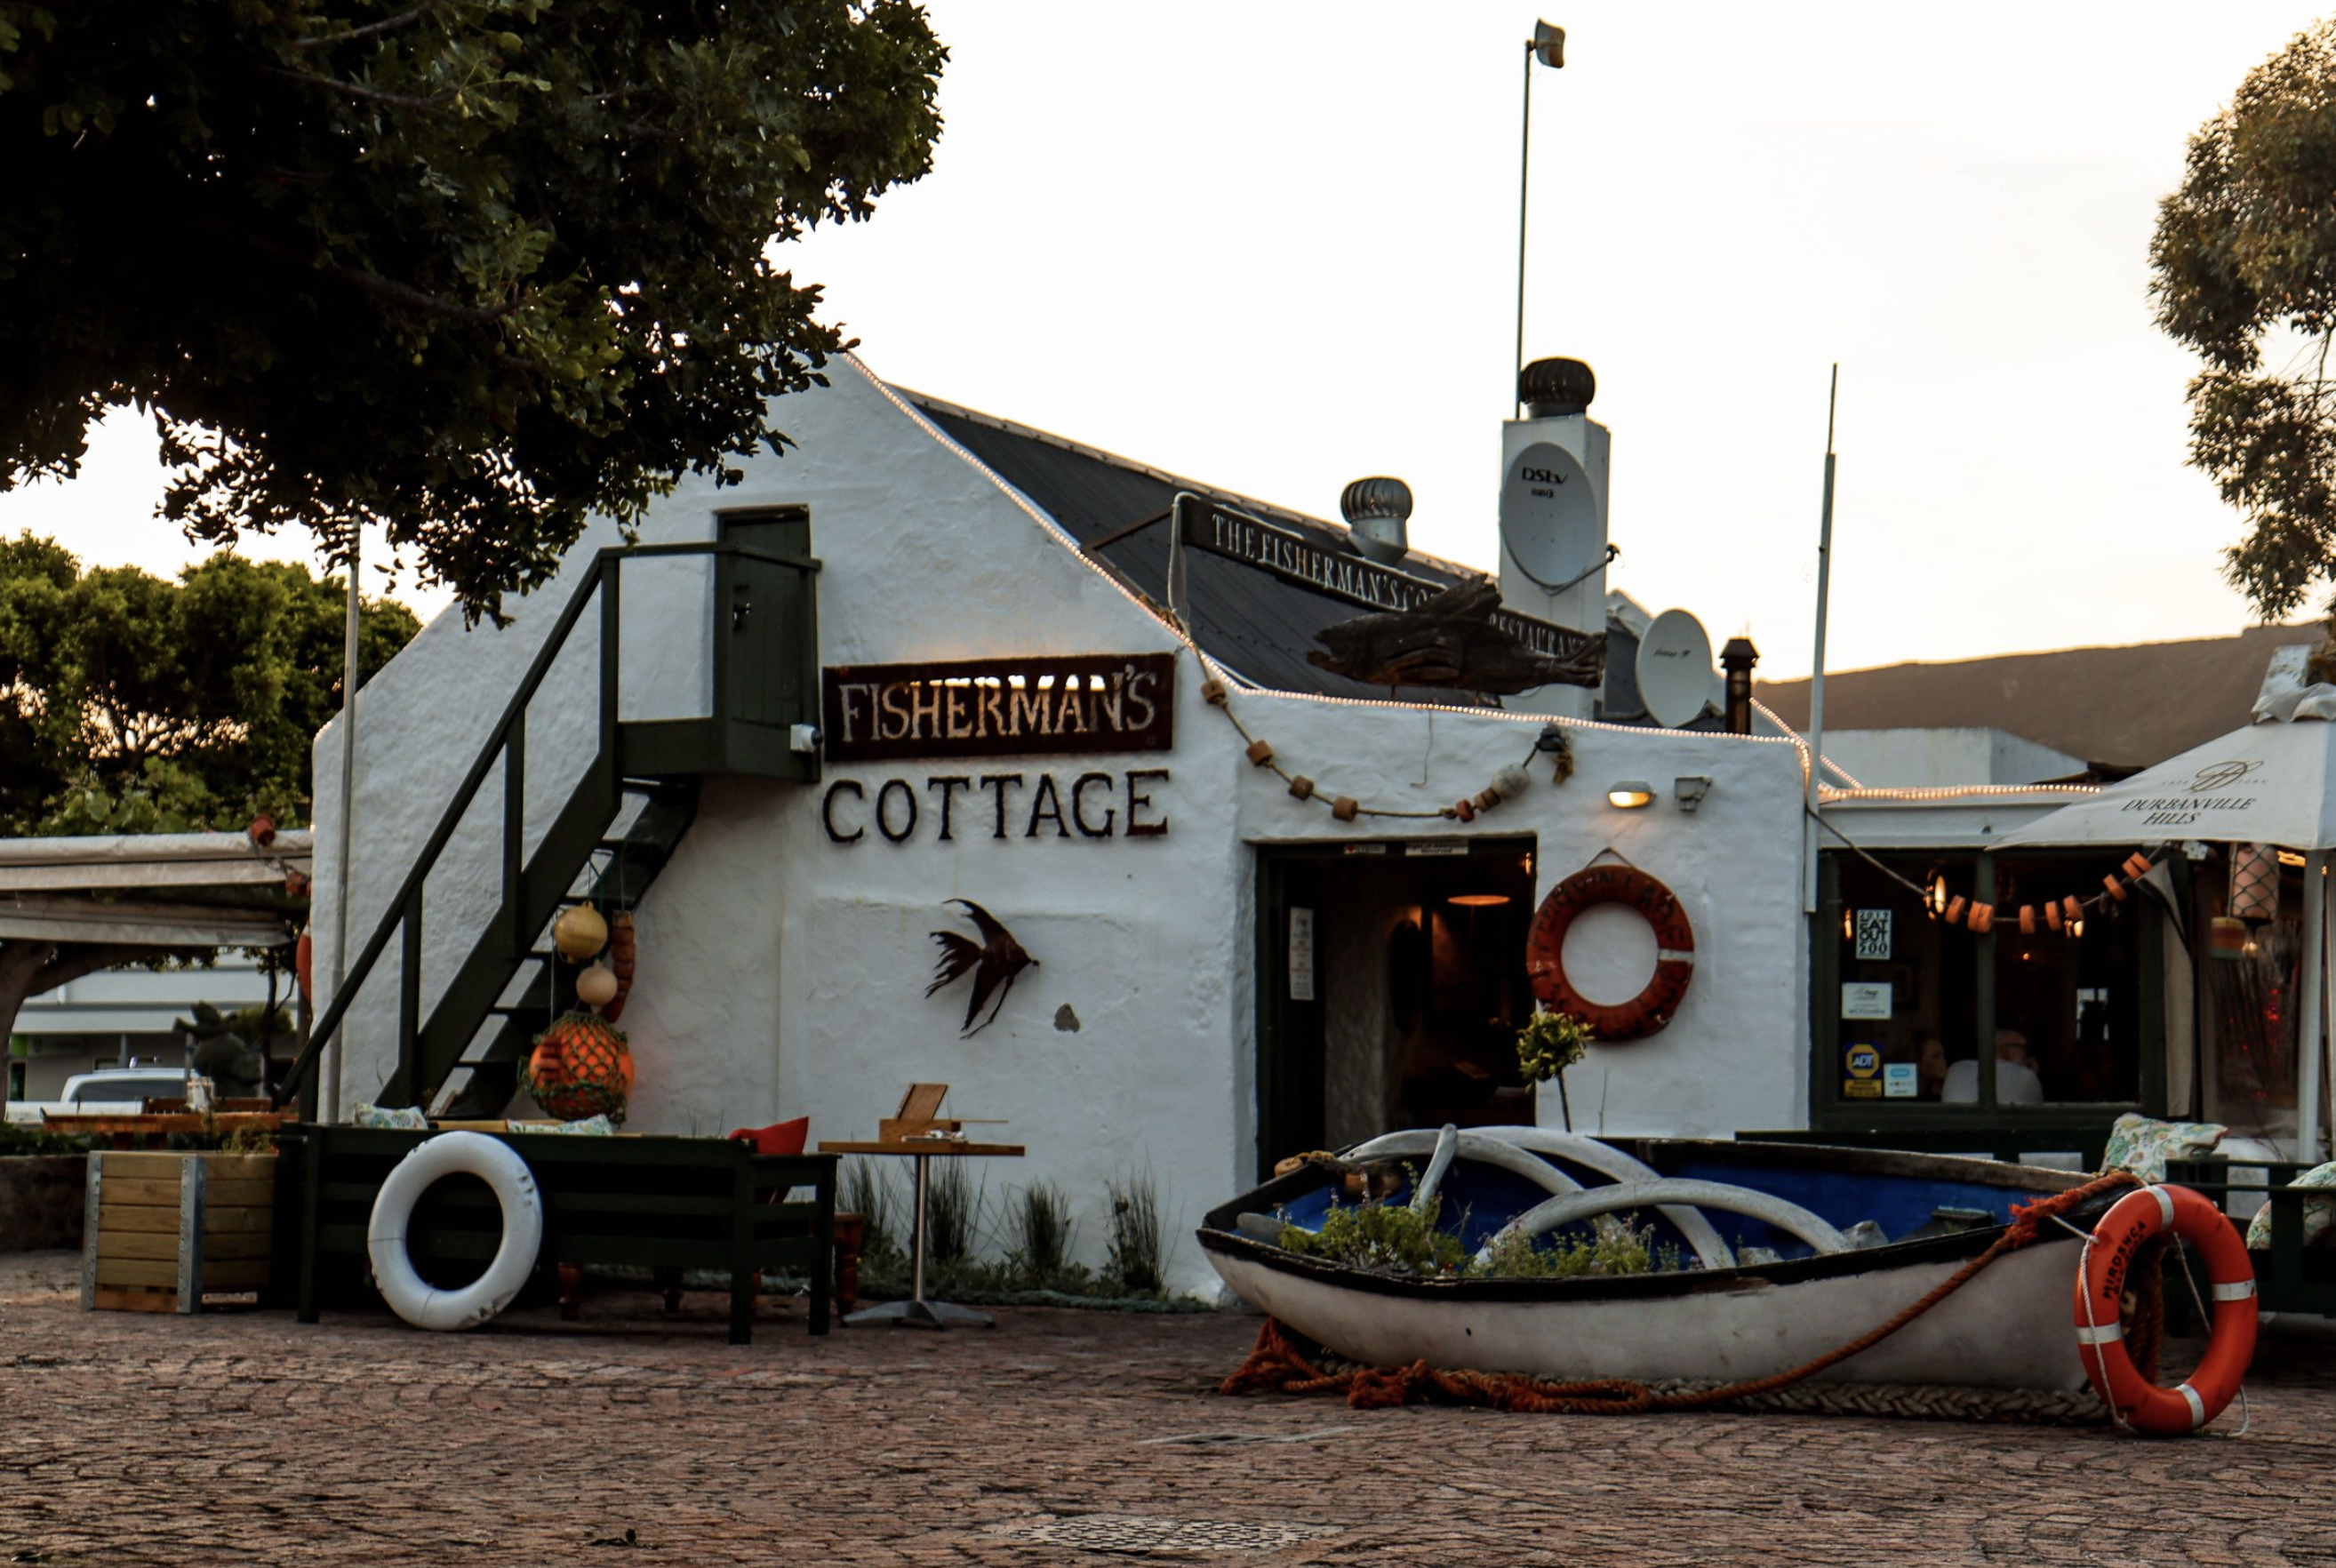 Fisherman's Cottage is the local's favorite restaurant in Hermanus. Photo by Fisherman's Cottage